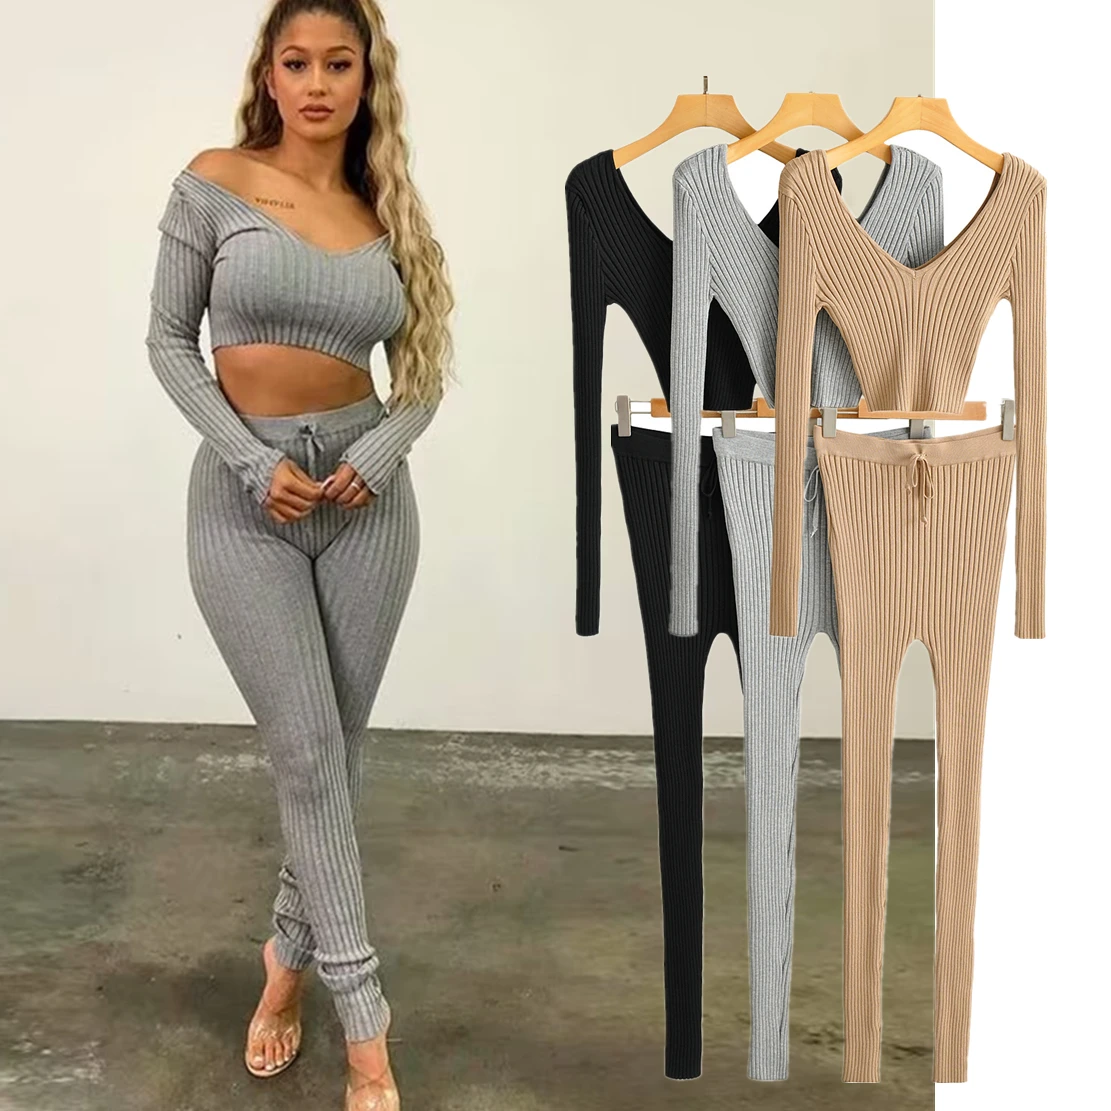 Maxdutti Ins Fashion Blogger  Two Pieces Sets Women Solid Slim Rib Knitwear Sets Sexy V-neck Tops And Skinny Pants maxdutti american vintage back to school city letter harem pants embroidery o neck sweatshirt sets women